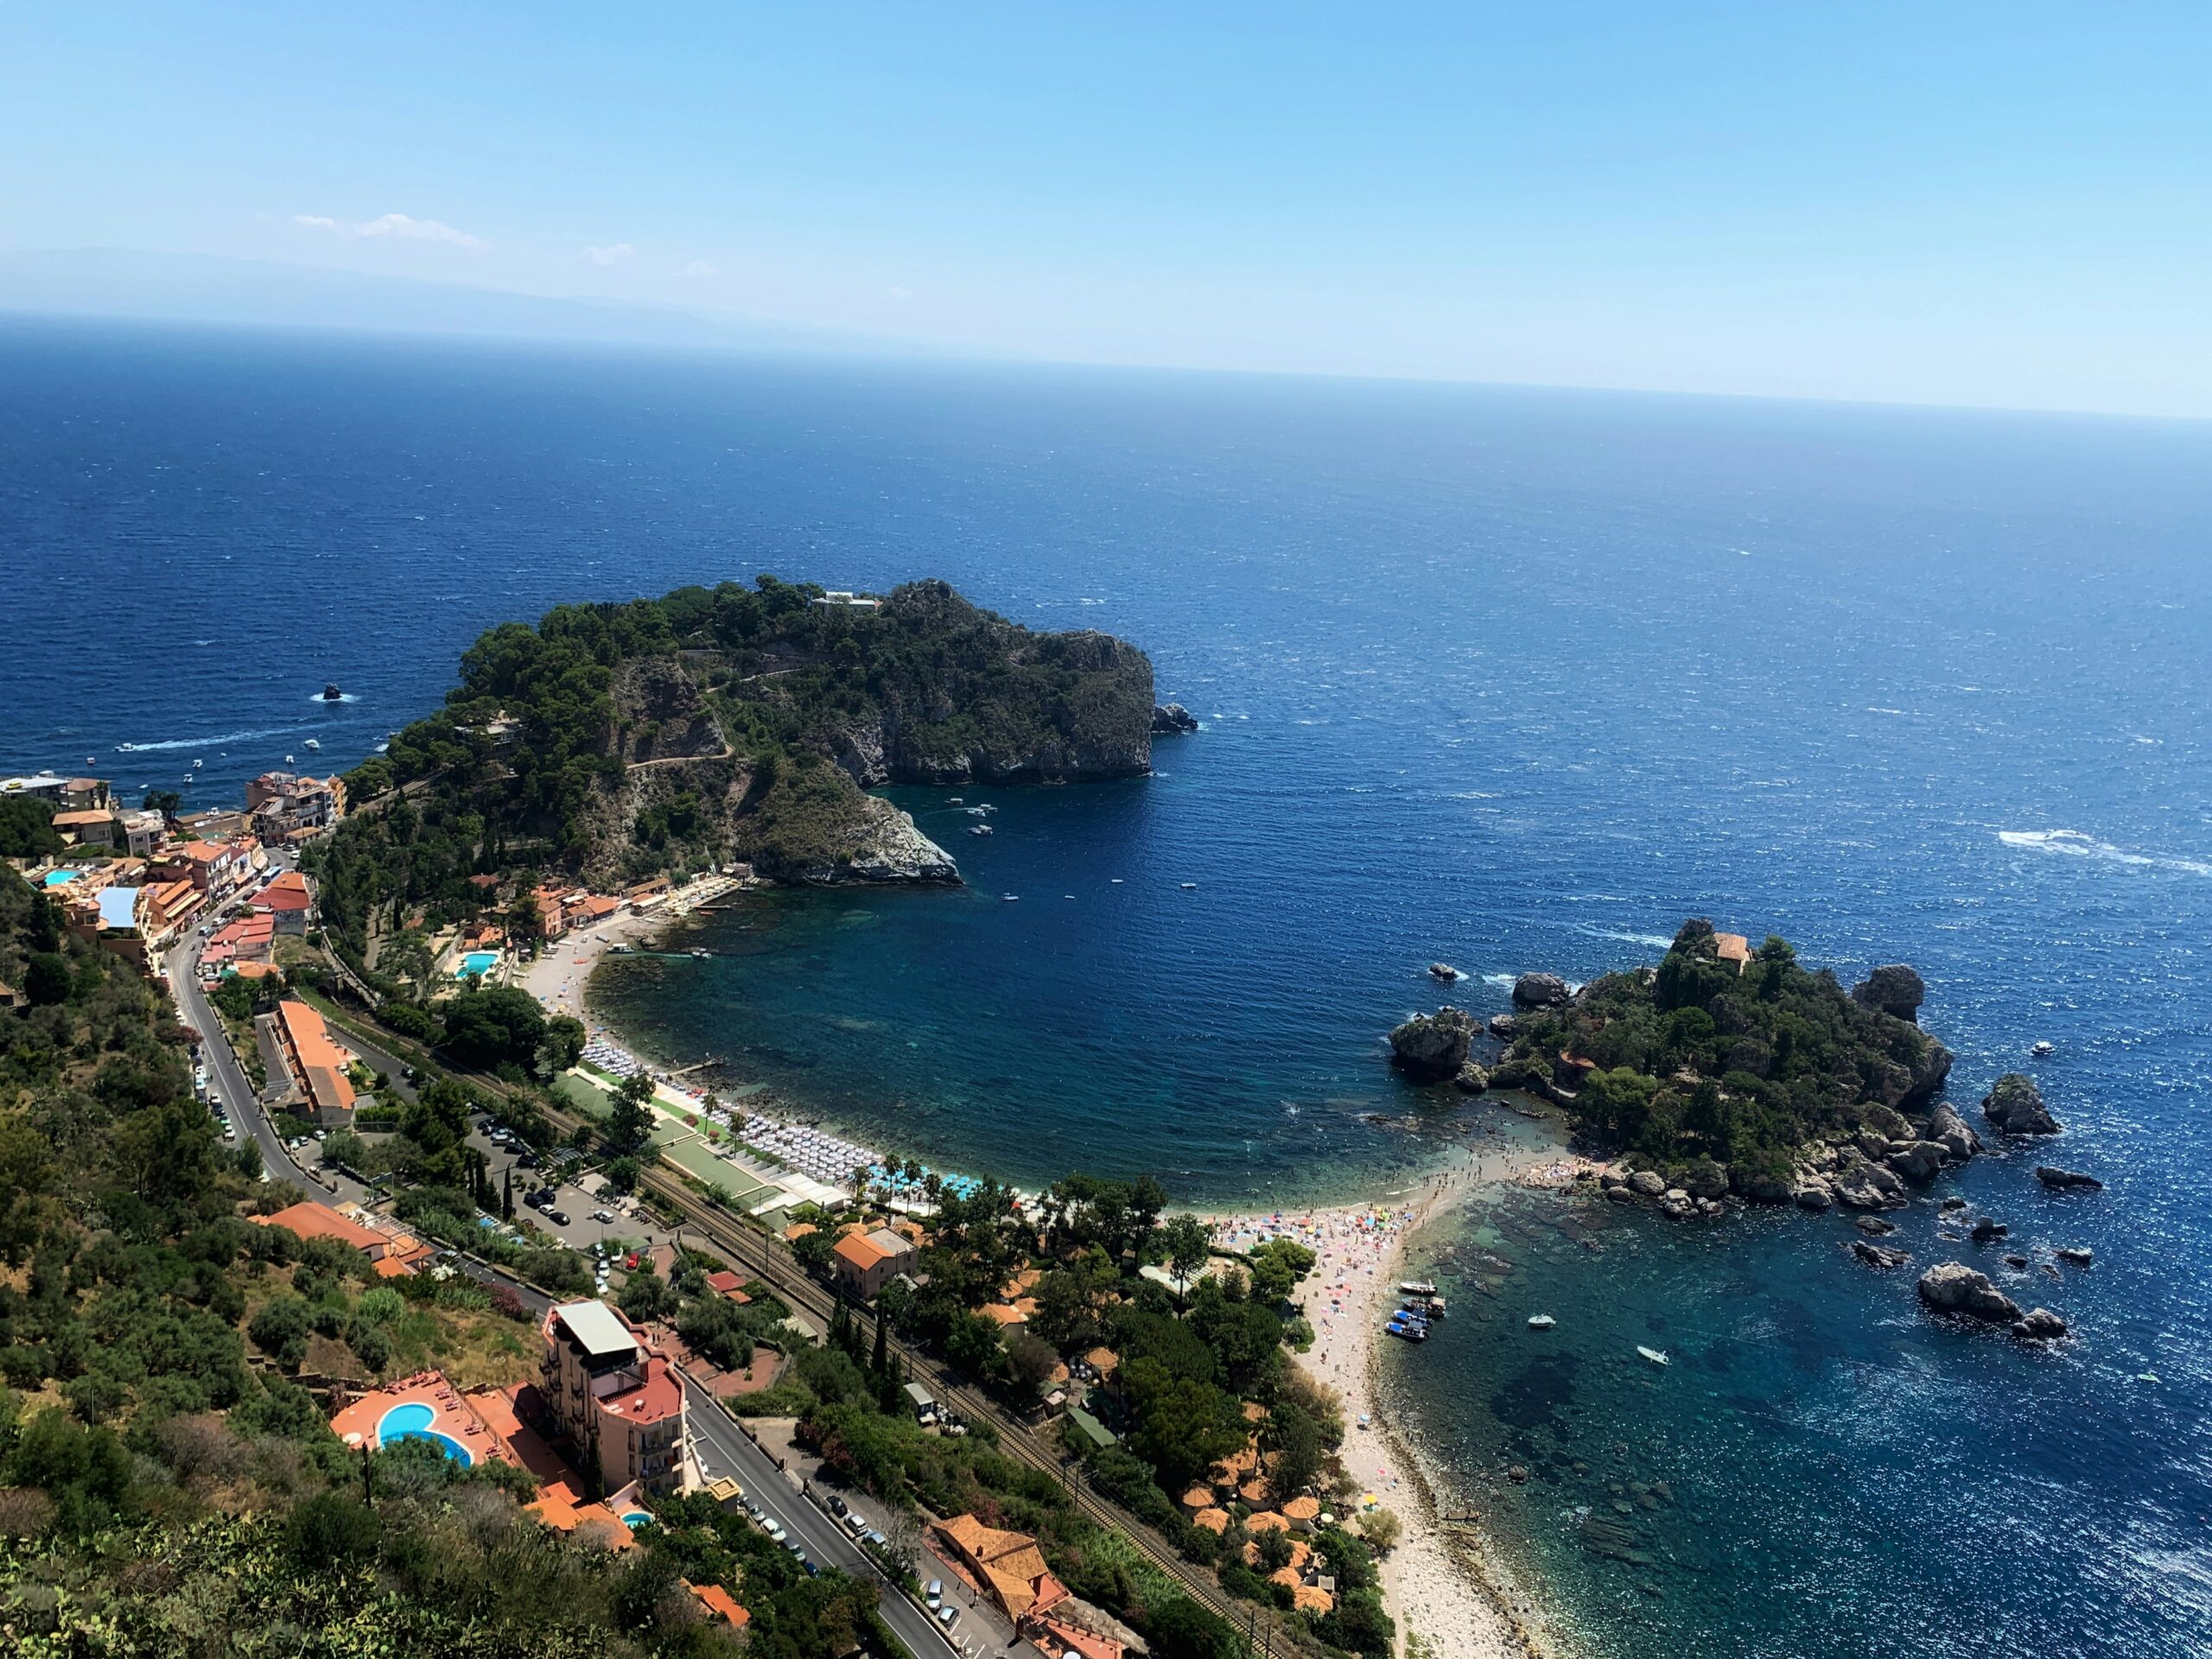 Taormina is a lesser known town of Sicily, but it is pretty accessible for tourists. 
pictured: the stunning coast of Taormina with beach homes surrounded by lush greenery